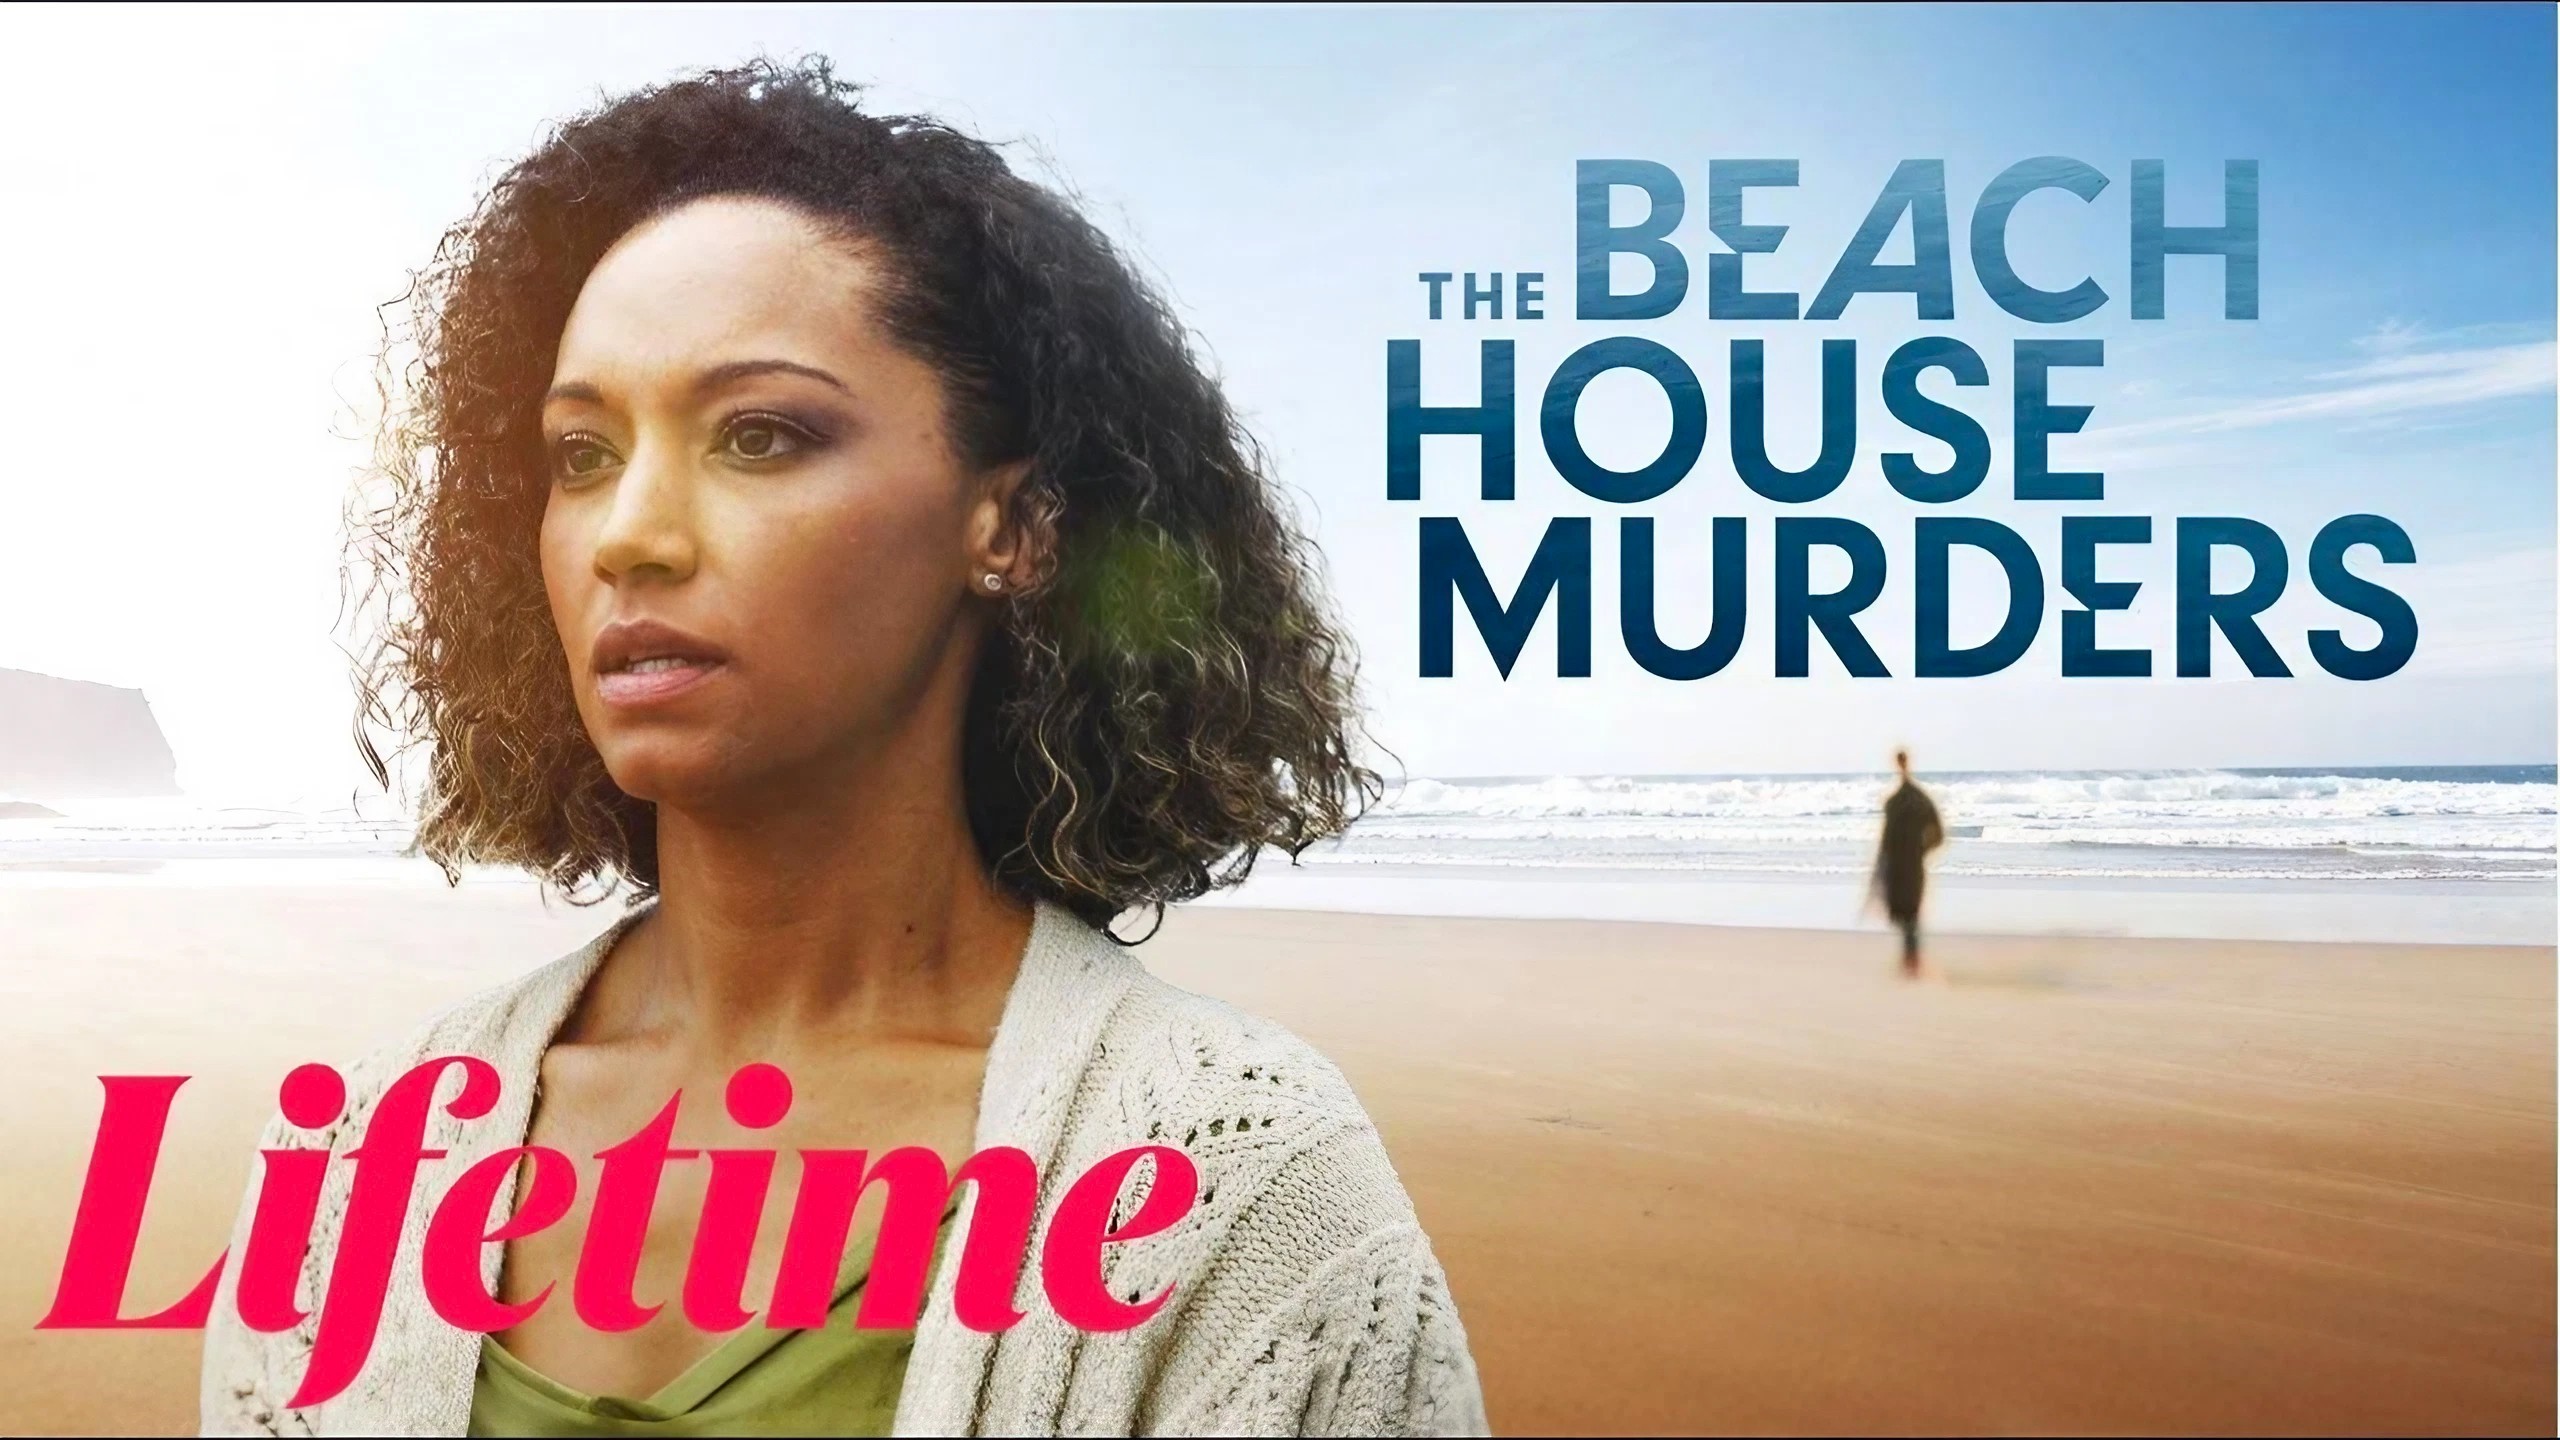 is Lifetime’s The Beach House Murders based on a true story